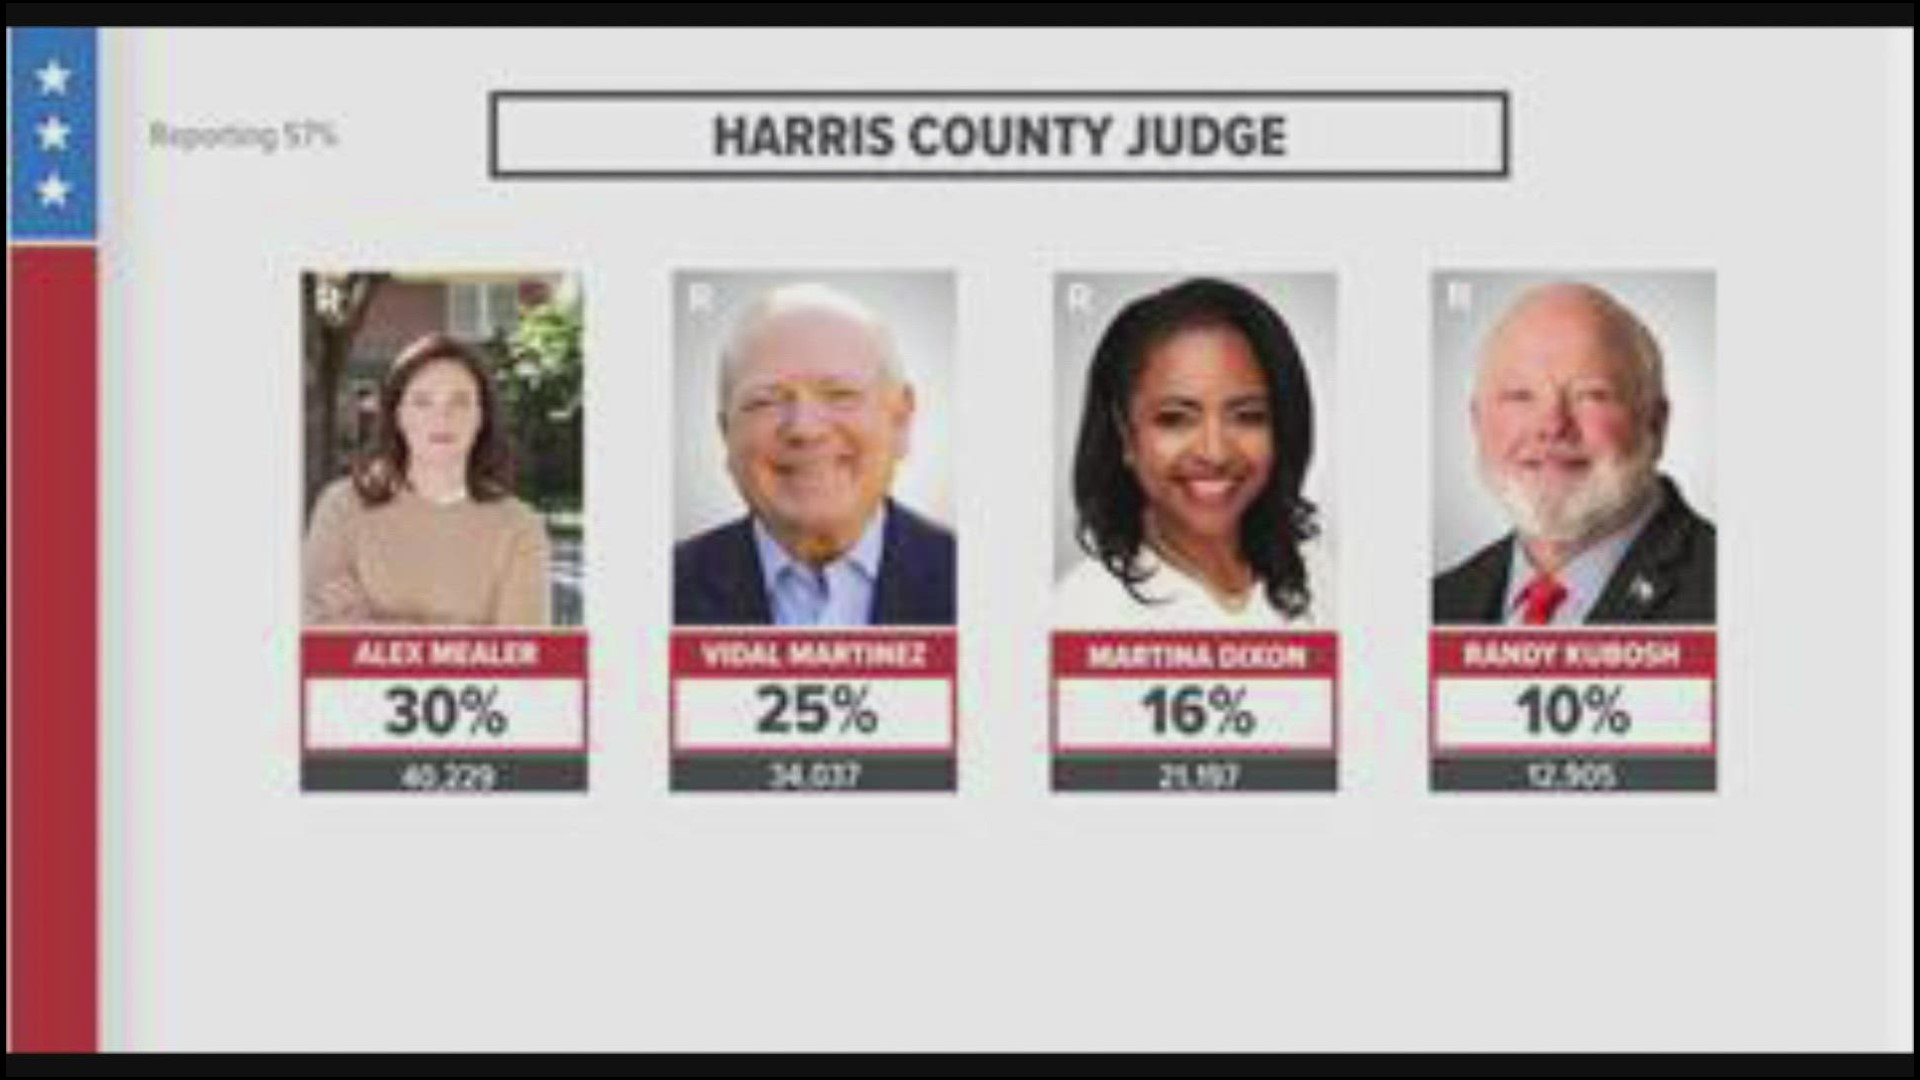 Republicans in Harris County are hoping to take back one of the biggest positions up for grabs in this year’s November election, county judge.